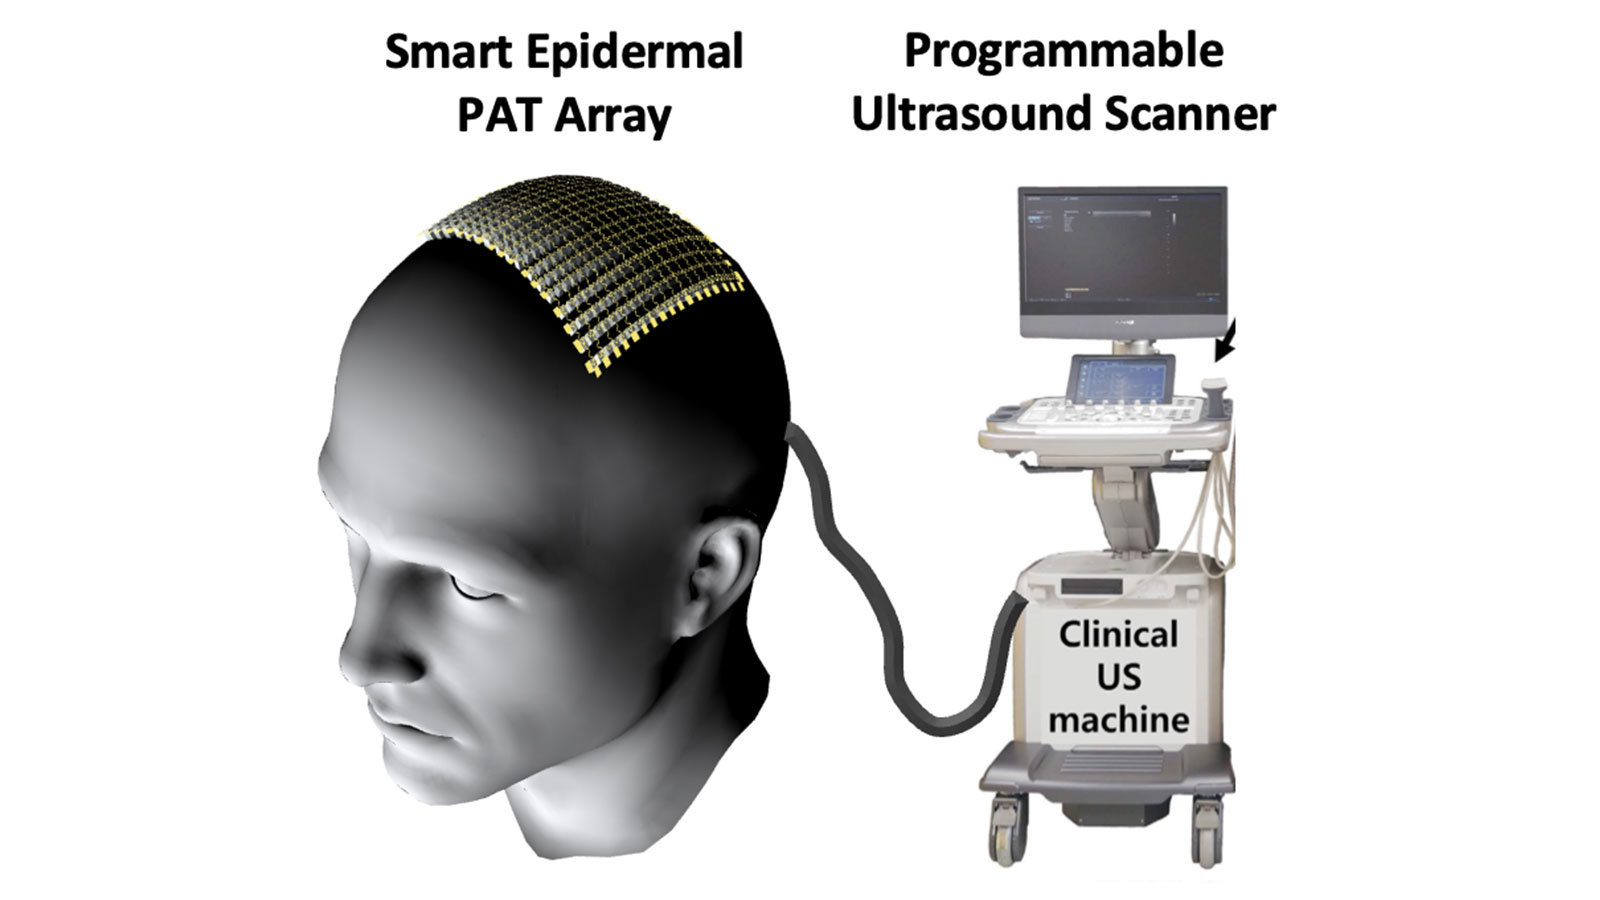 A low-profile, wearable imaging tool will be able to provide physicians with accurate, detailed, 3D brain images